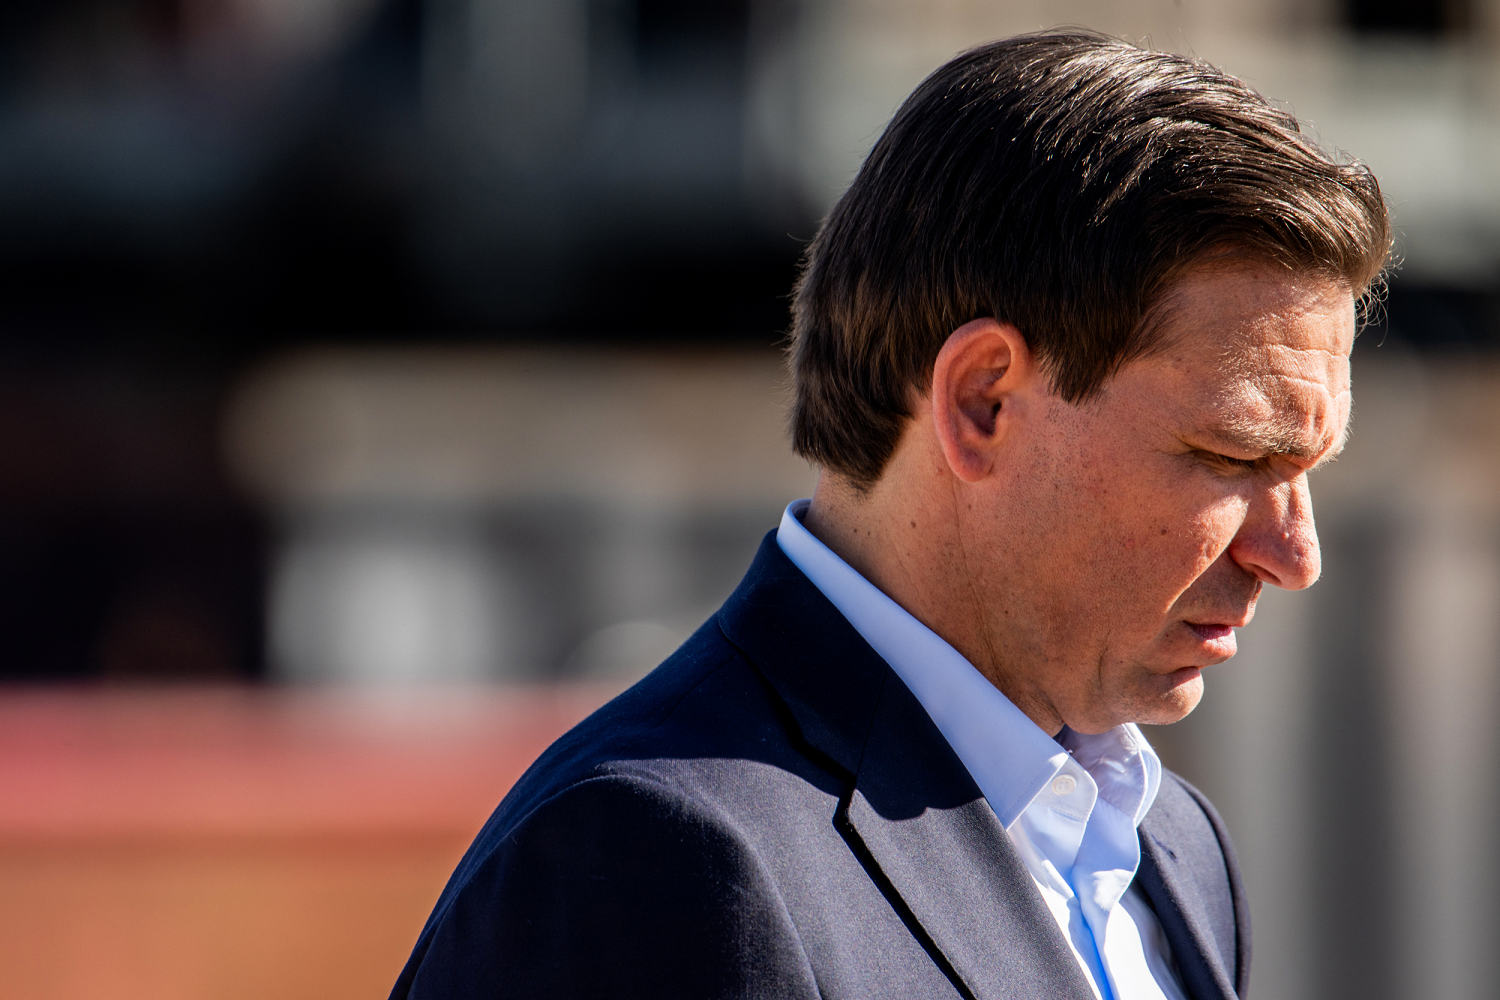 DeSantis refuses to address Elon Musk’s antisemitic post: ‘I’ve never seen him indulge in any of that’